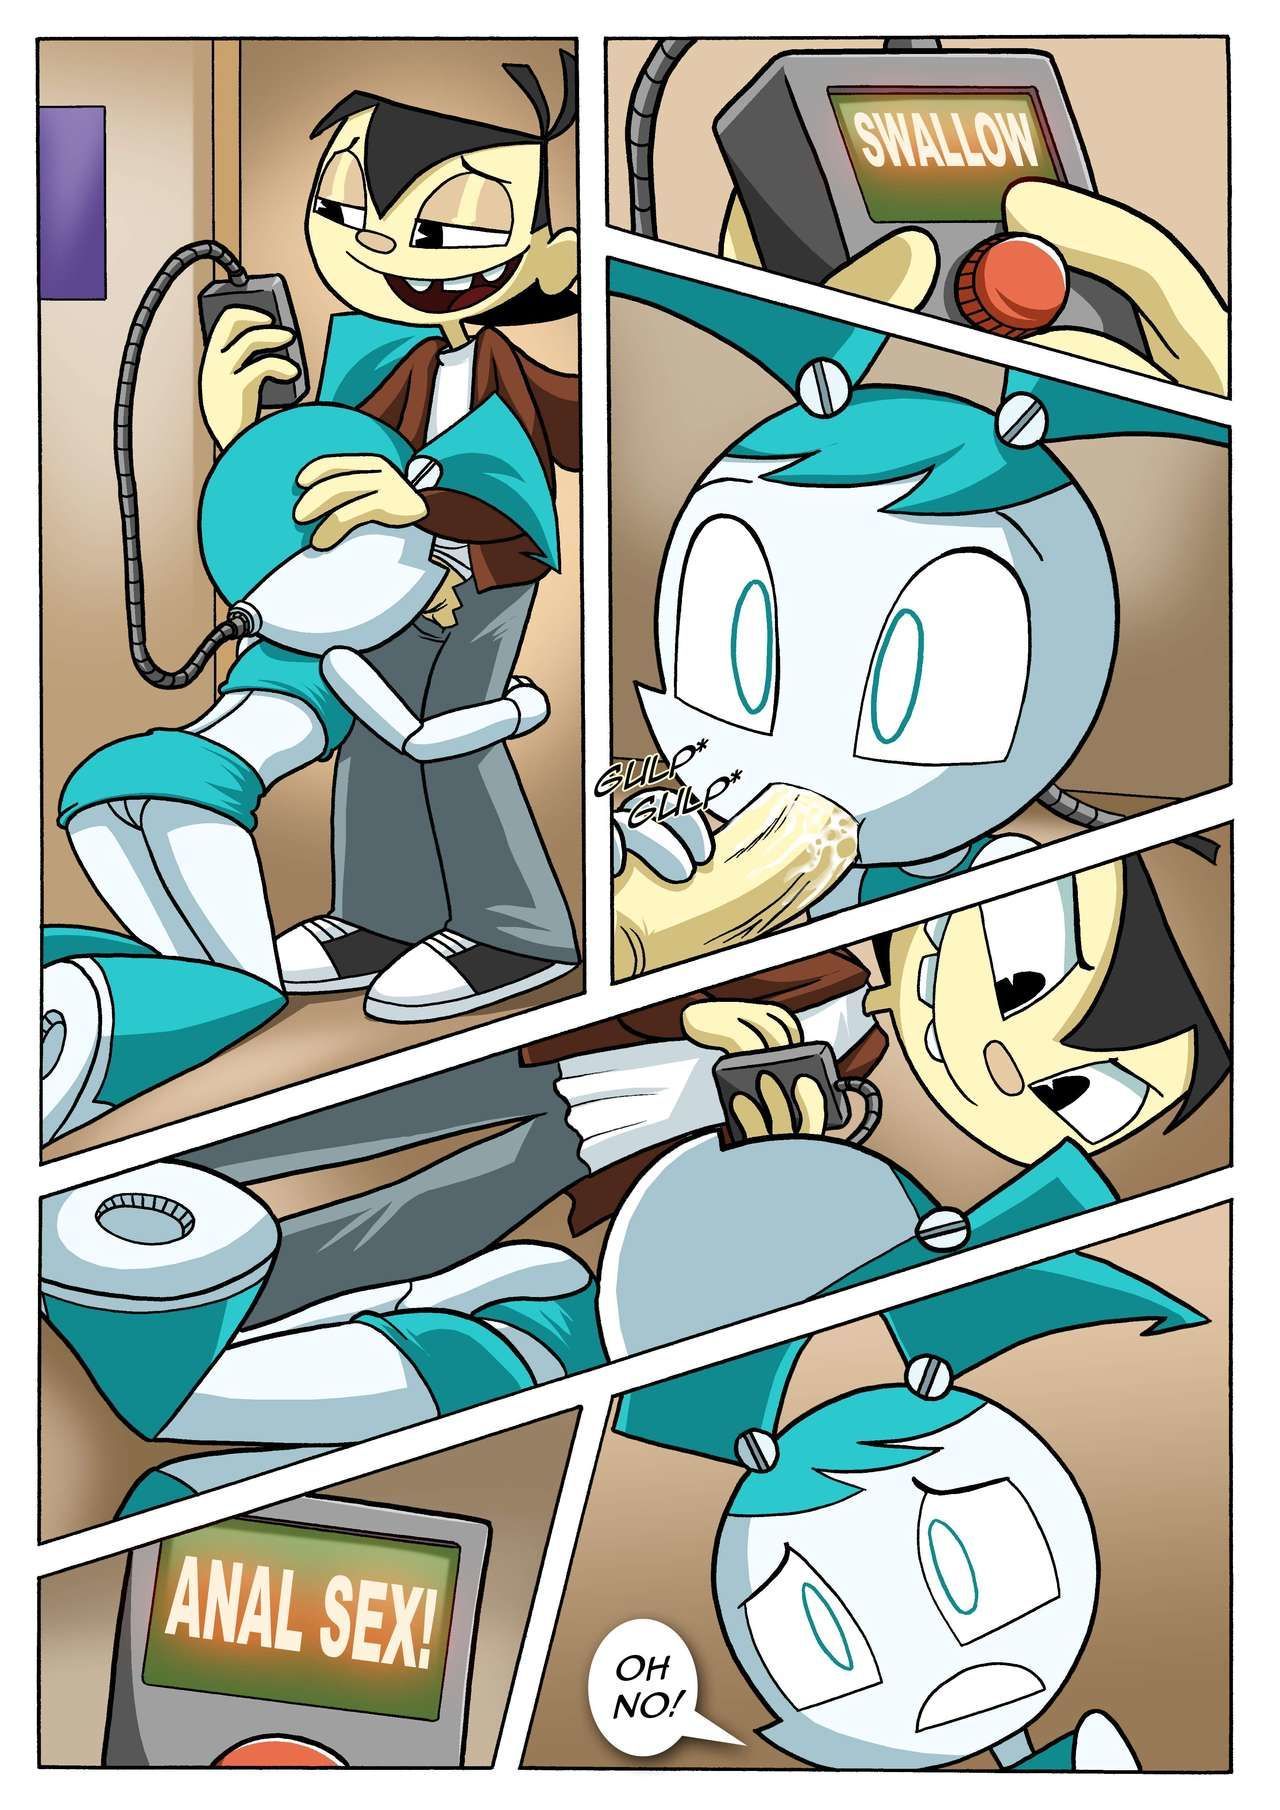 Palcomix Reprogramed for Fun (My Life As a Teenage Robot)